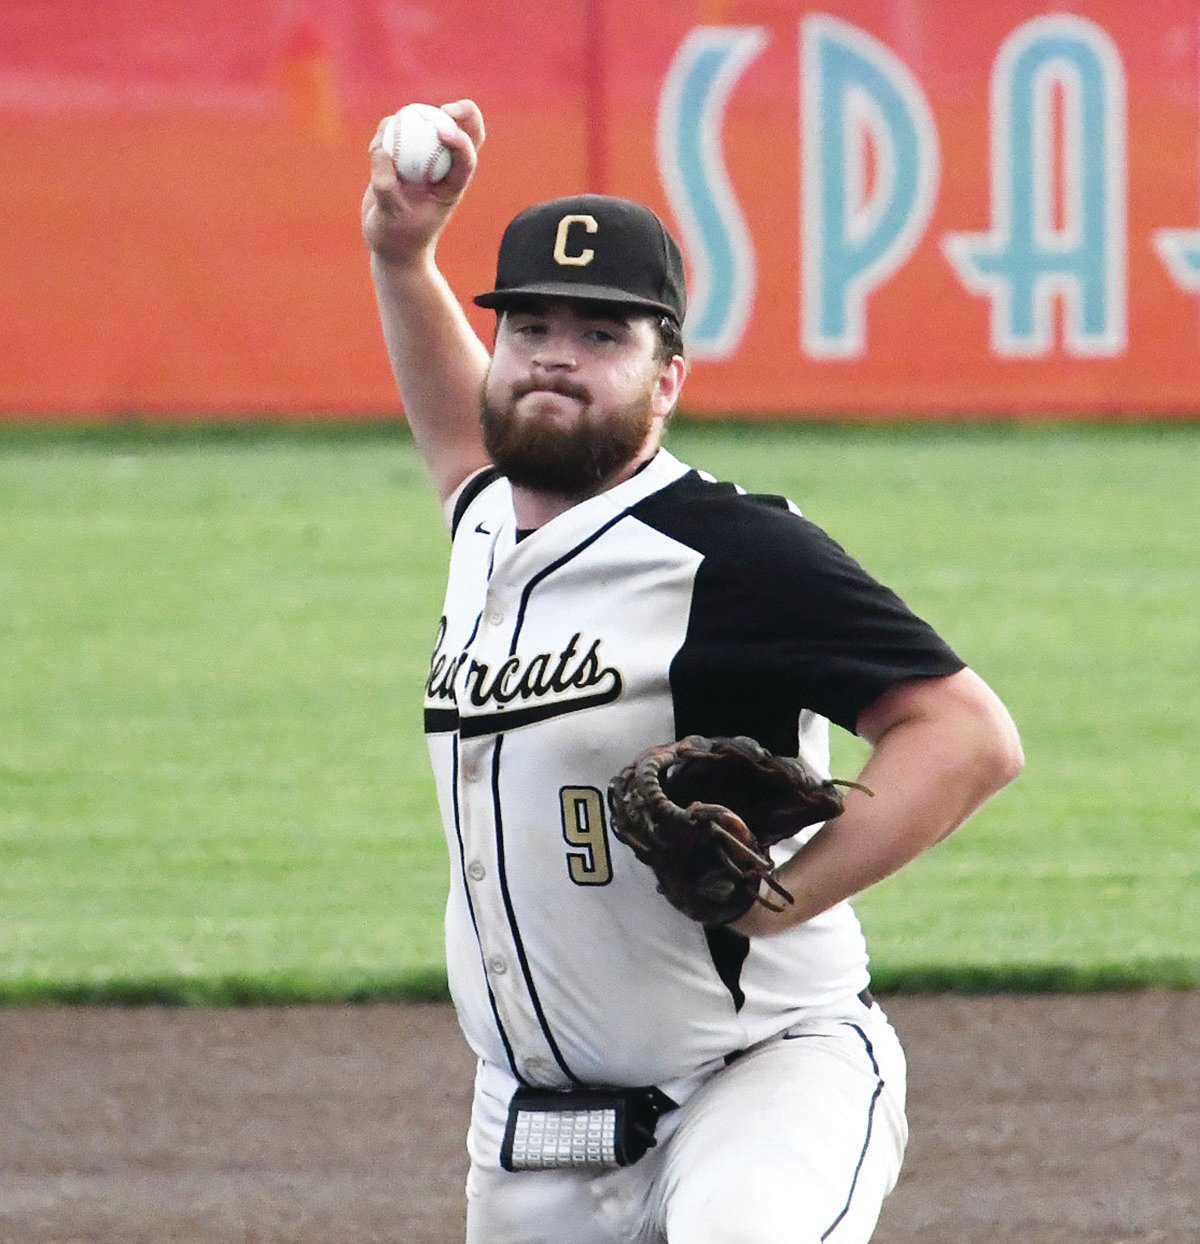 Cairo's Jack Prewett pitched the seventh inning in relief of Logan Head and earned the win despite giving up two earned runs.